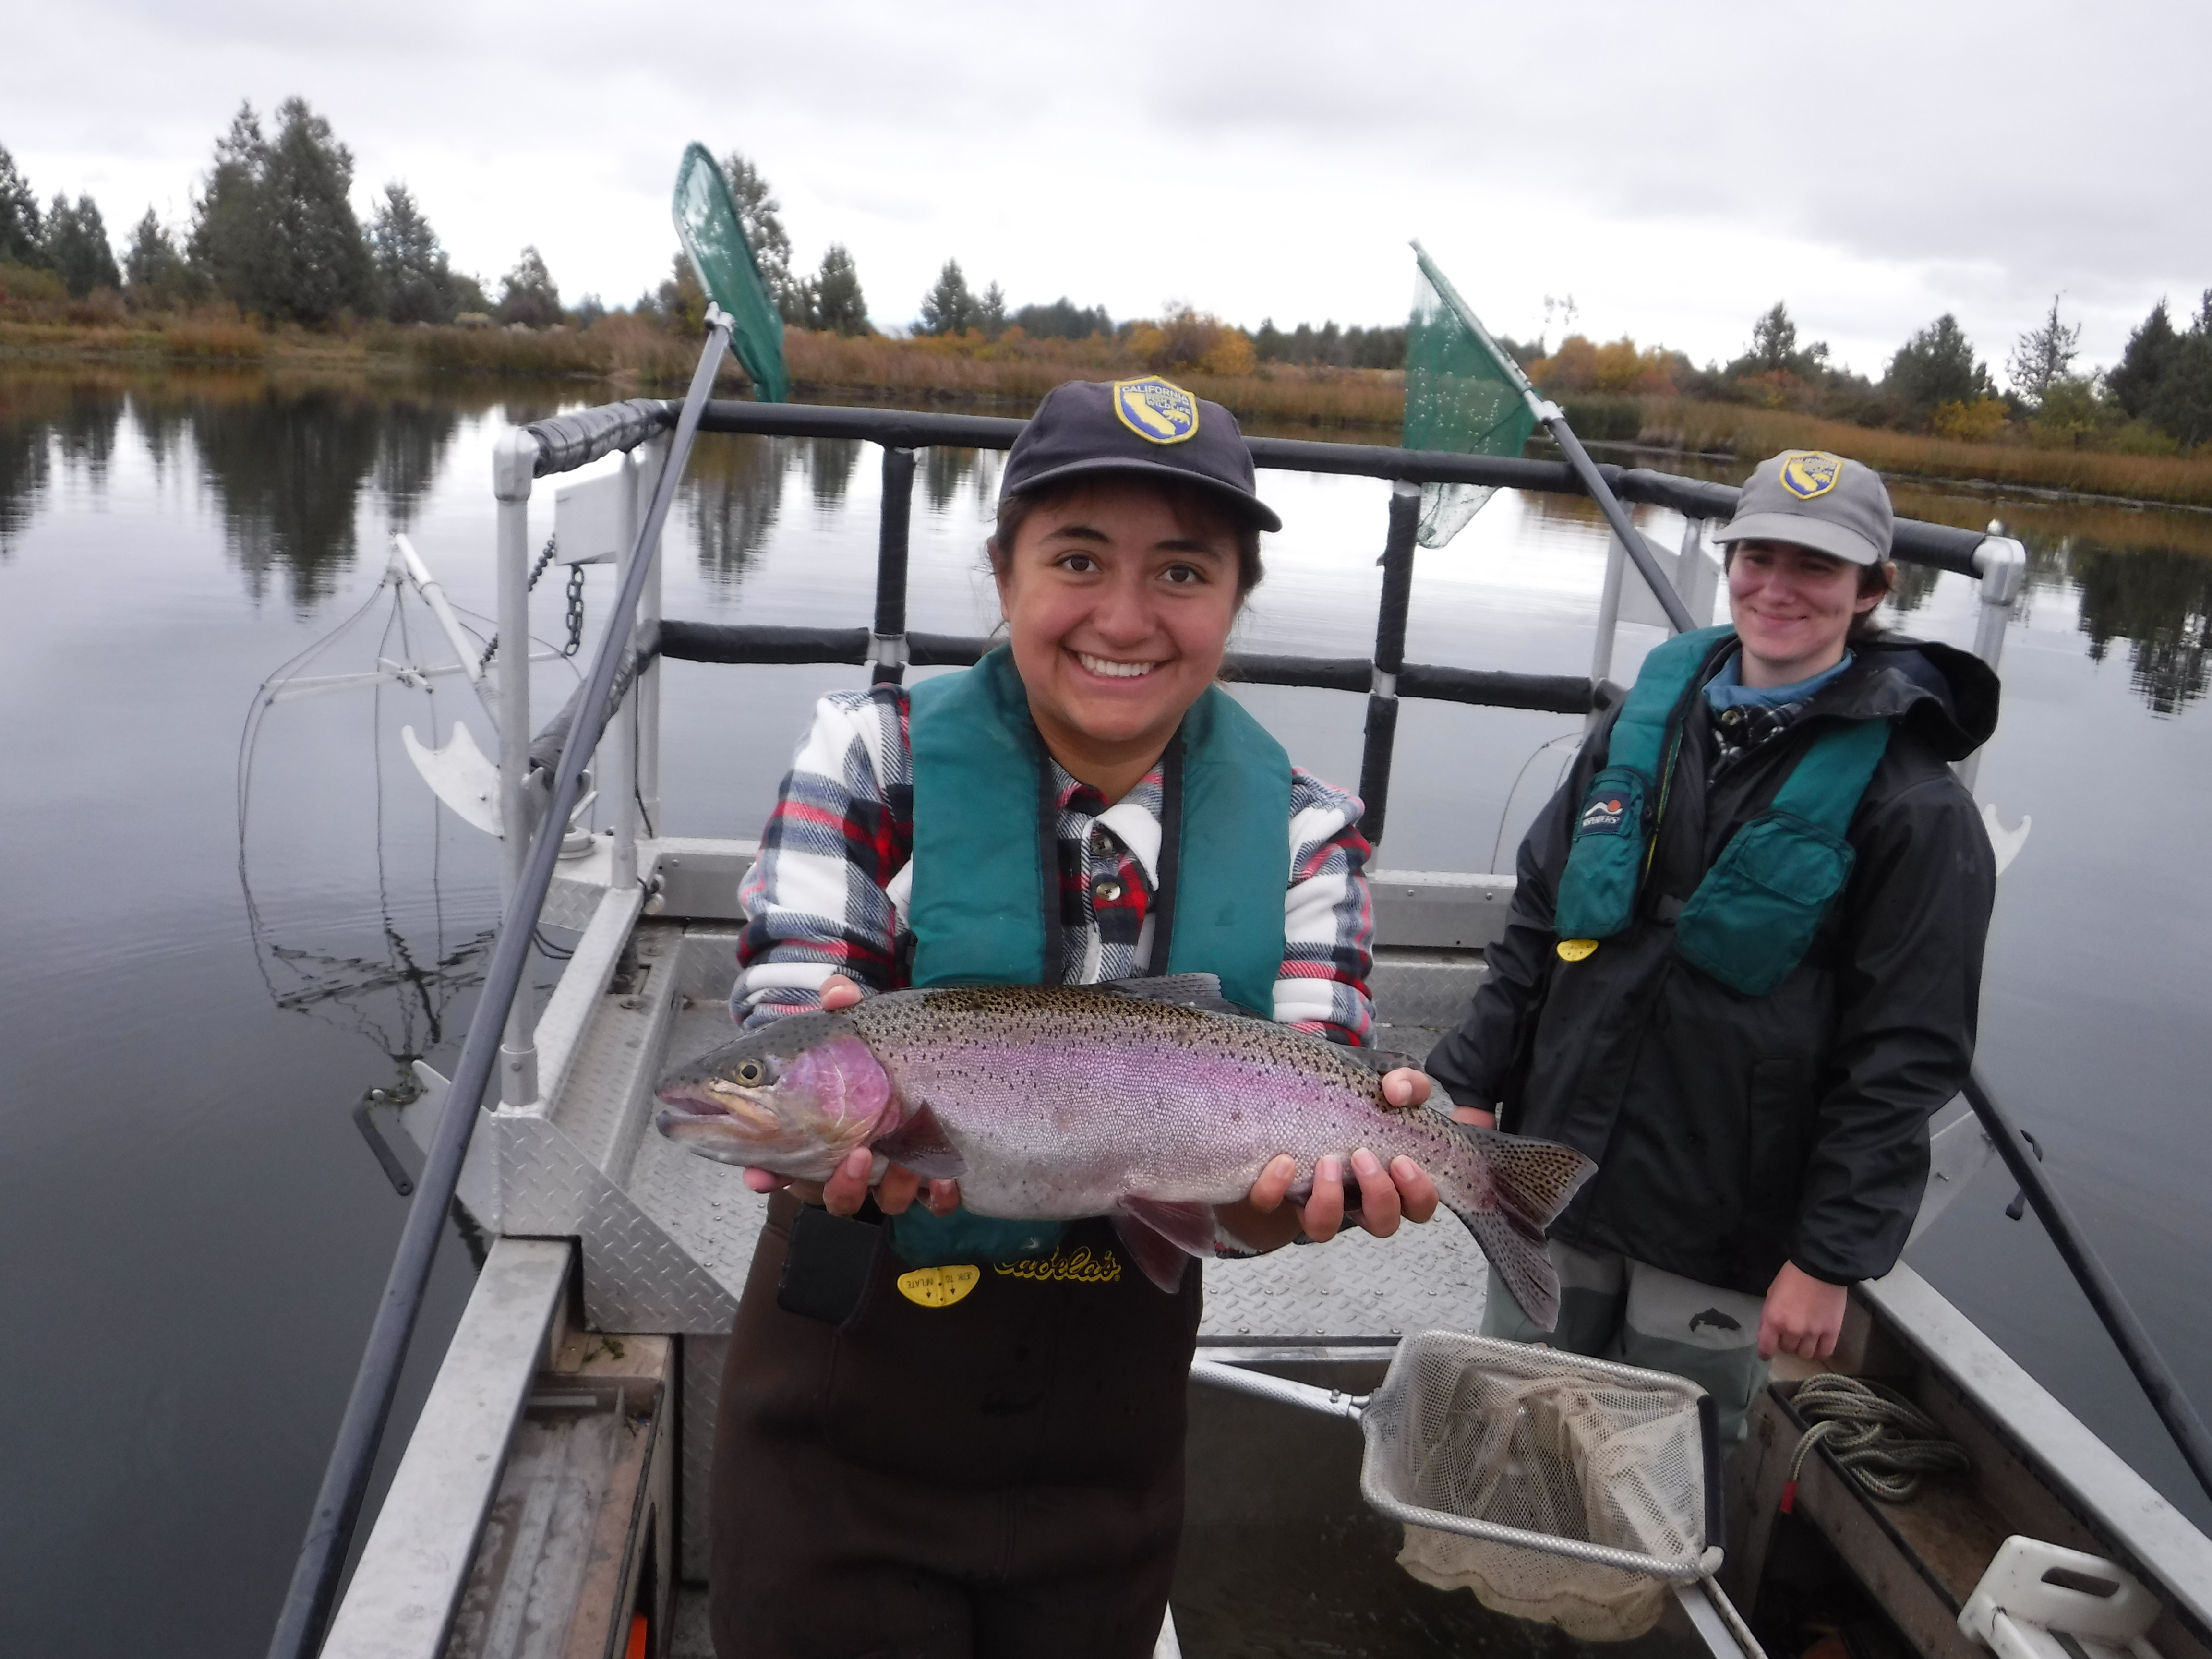 Monica standing on an electrofishing boat smiling and holding a large trout